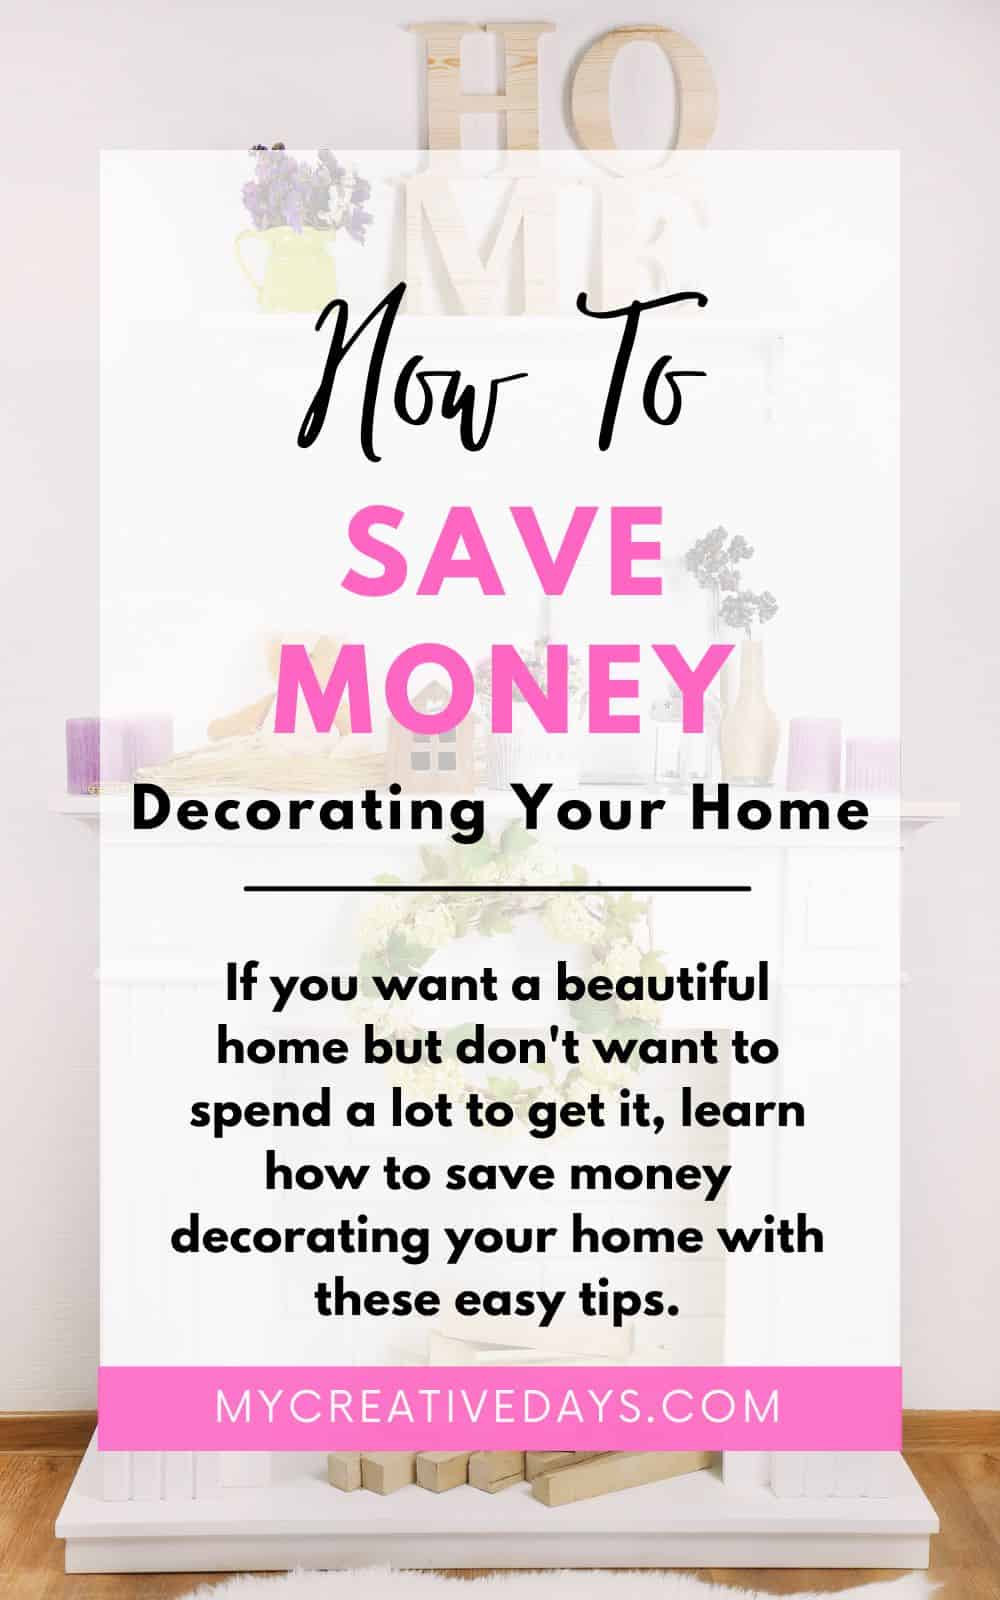 Want a beautiful home but don't want to spend a lot to get it? Learn how to save money decorating your home with these easy tips.